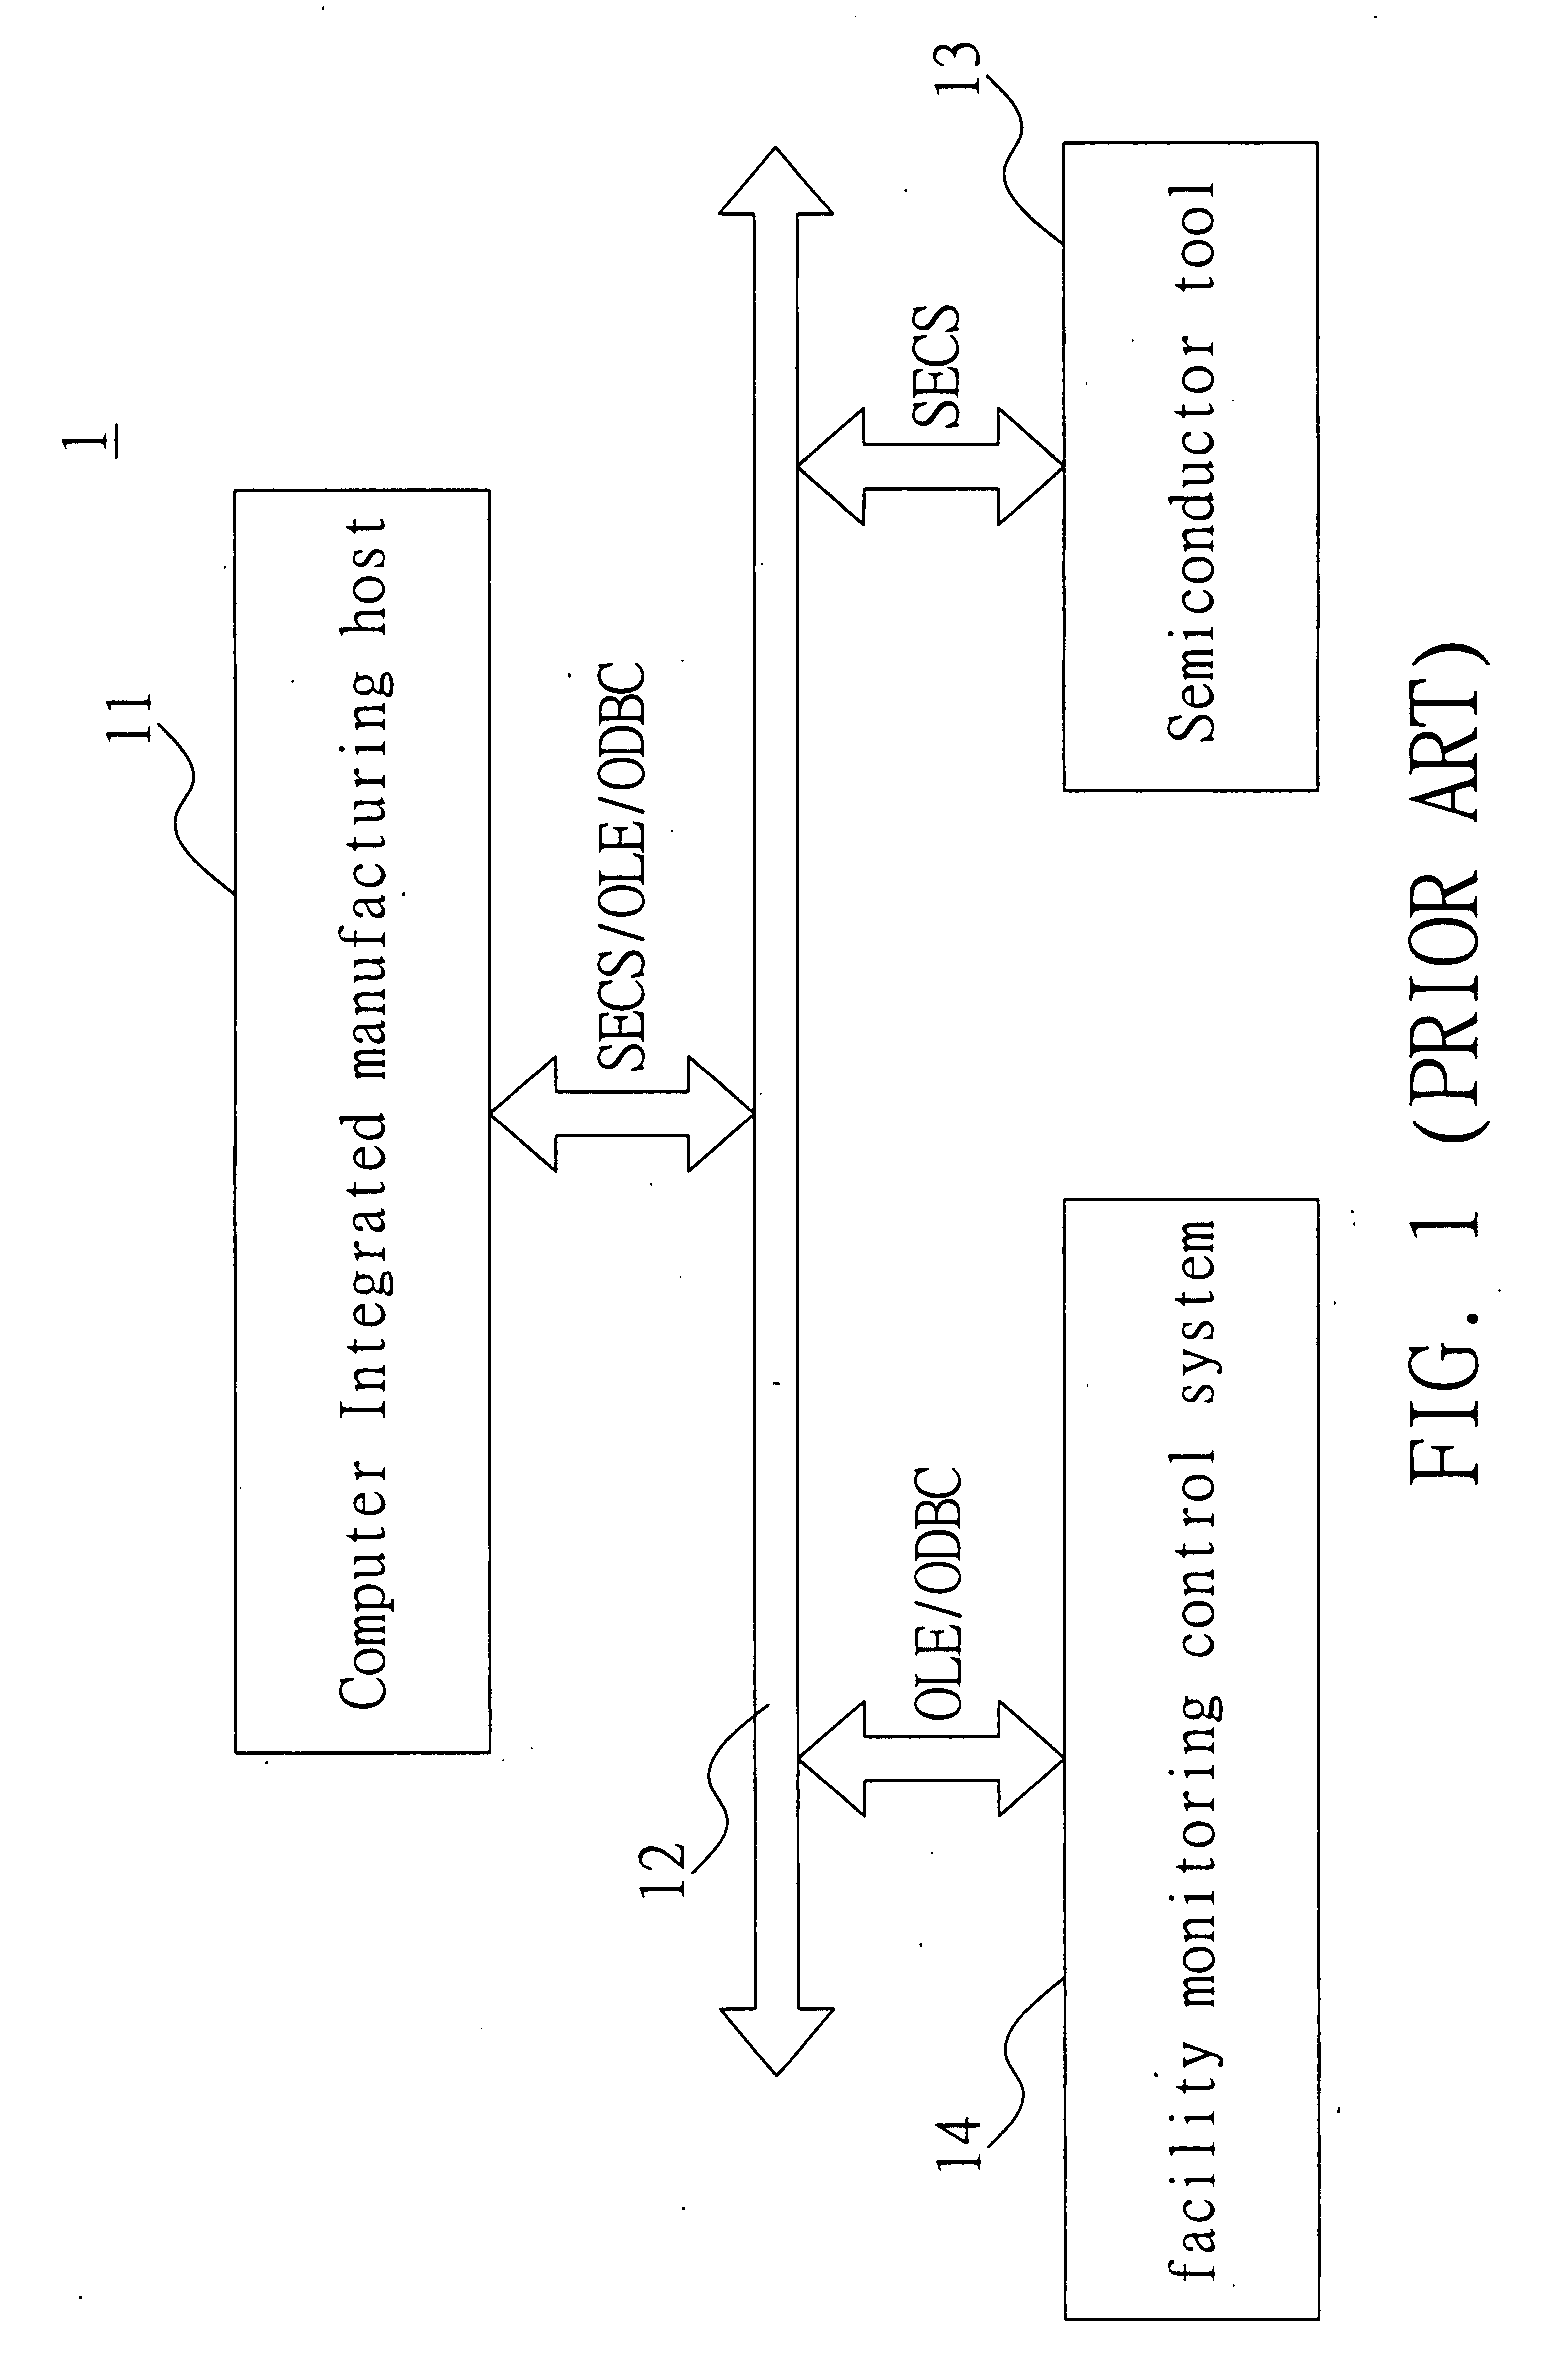 Real-time fault detection and classification system in use with a semiconductor fabrication process